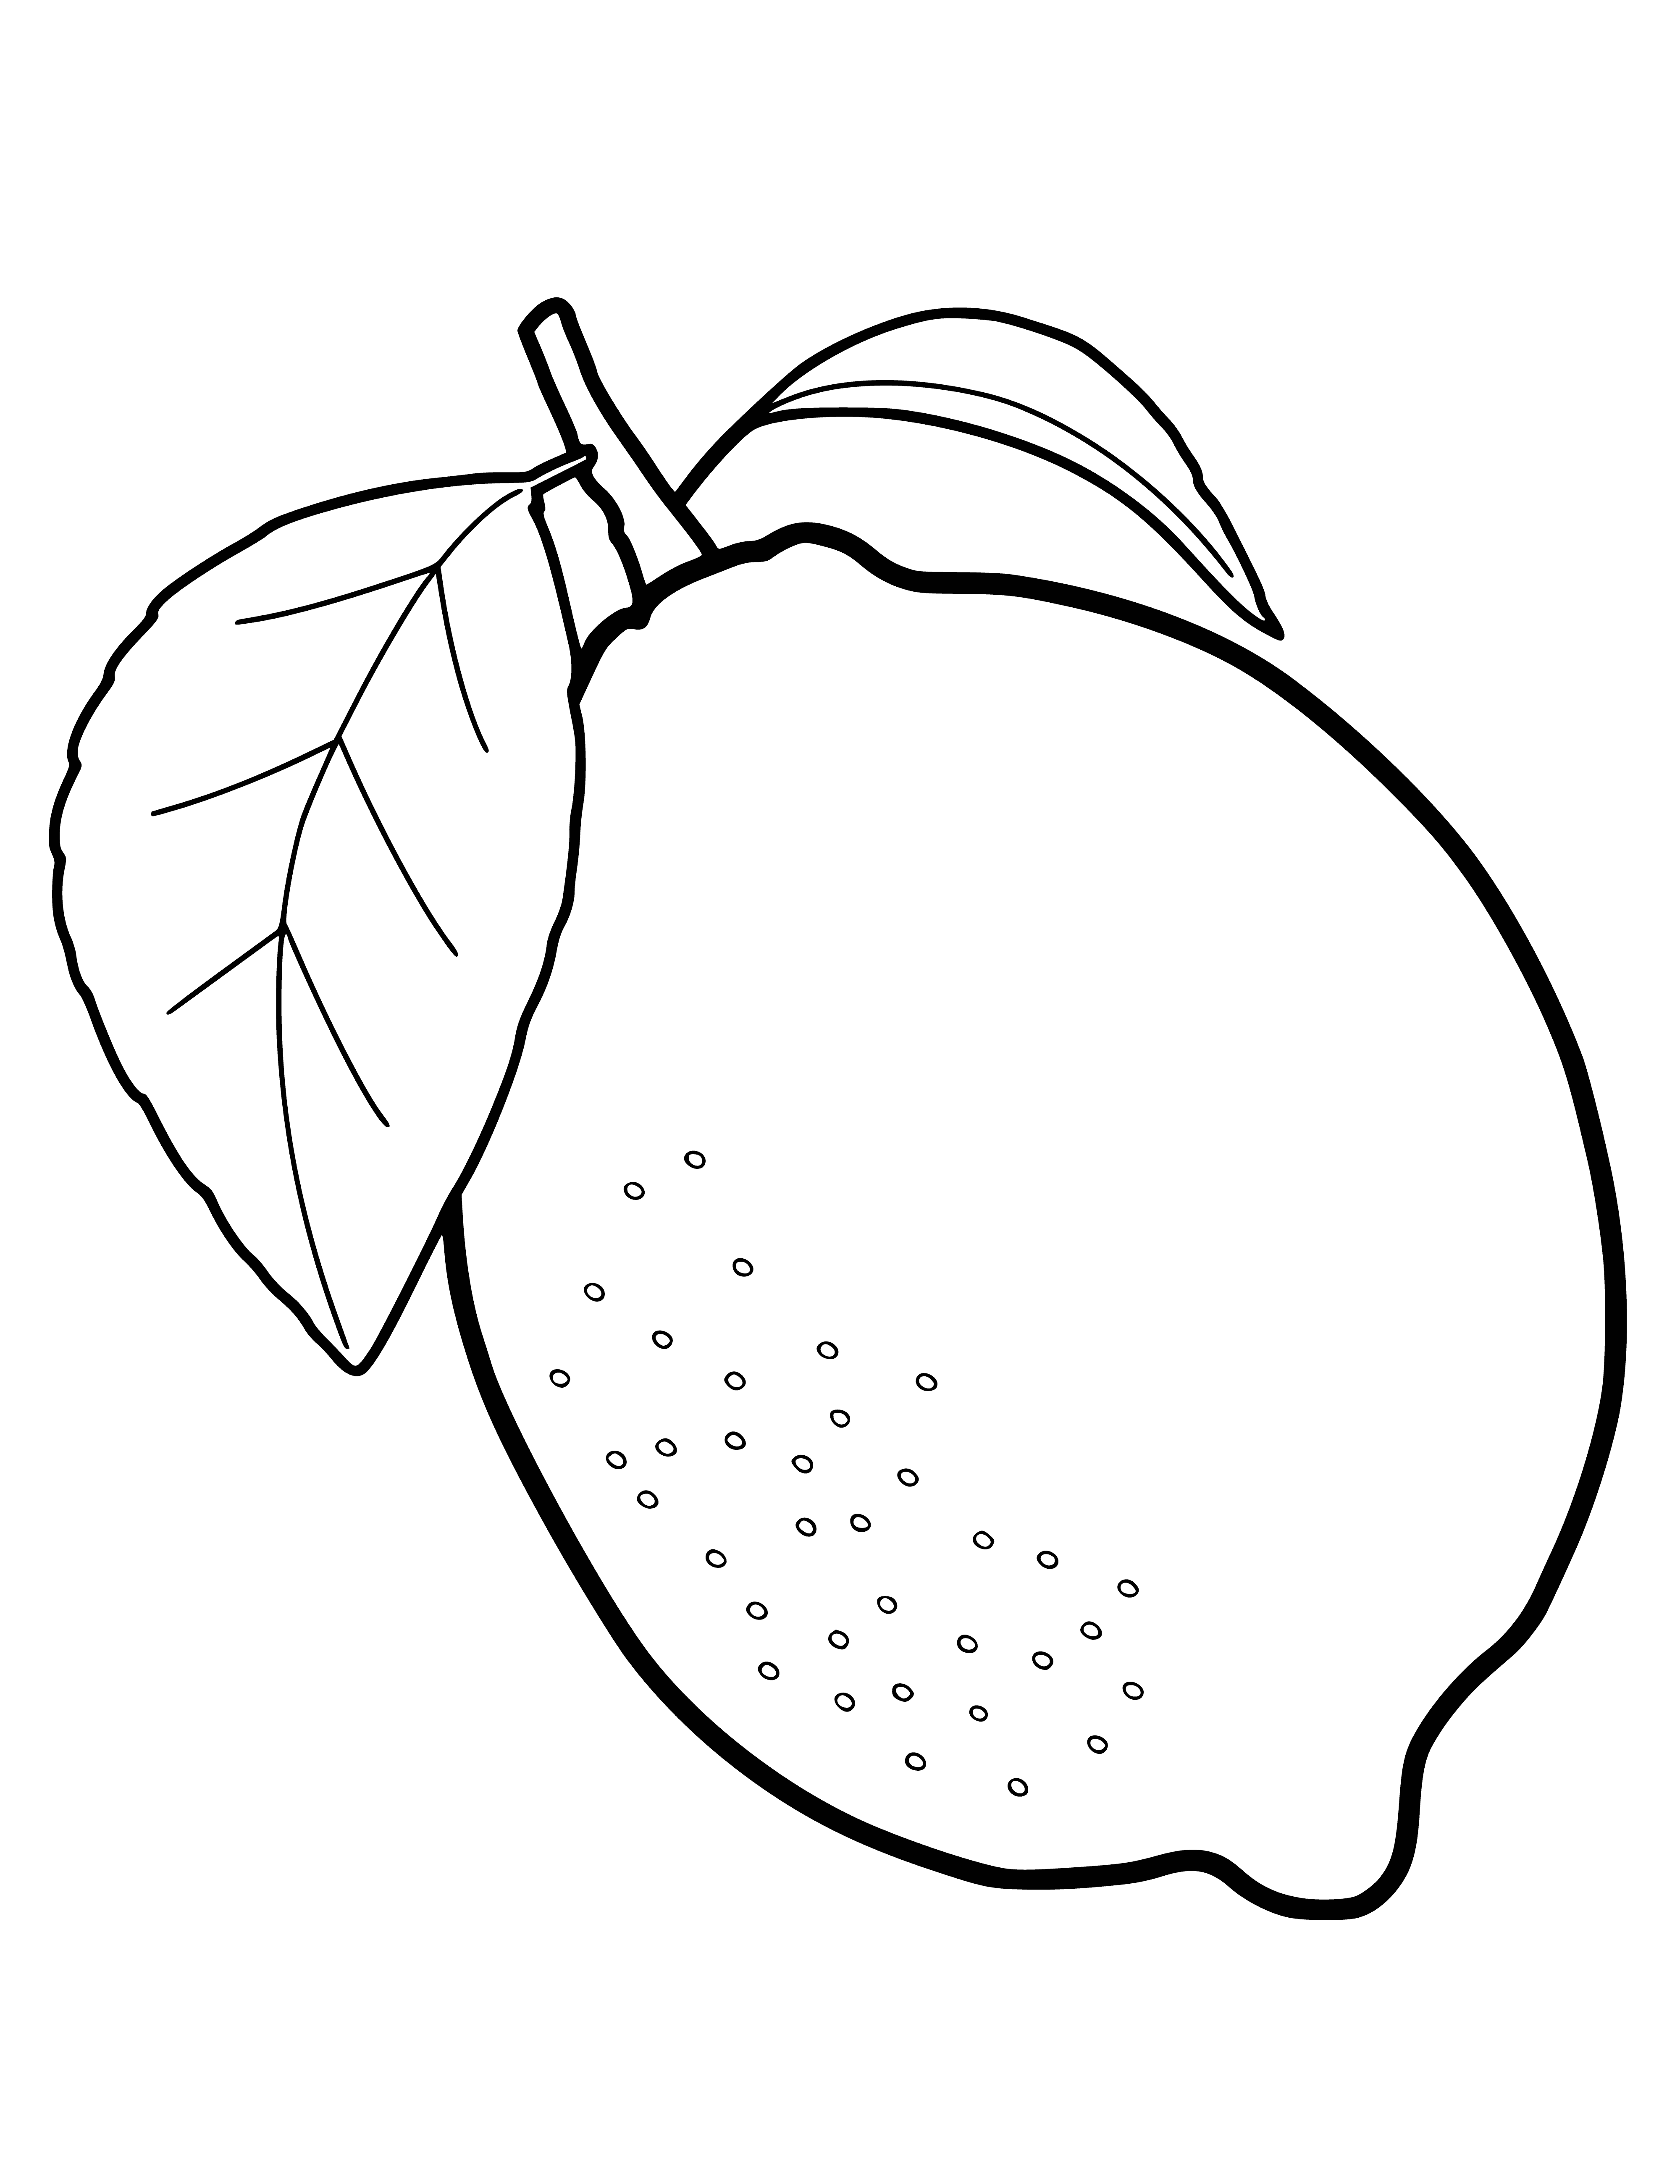 coloring page: A lemon is a yellow citrus fruit w/ sour & acidic taste. Used in cooking & baking; also a good source of vitamin C.